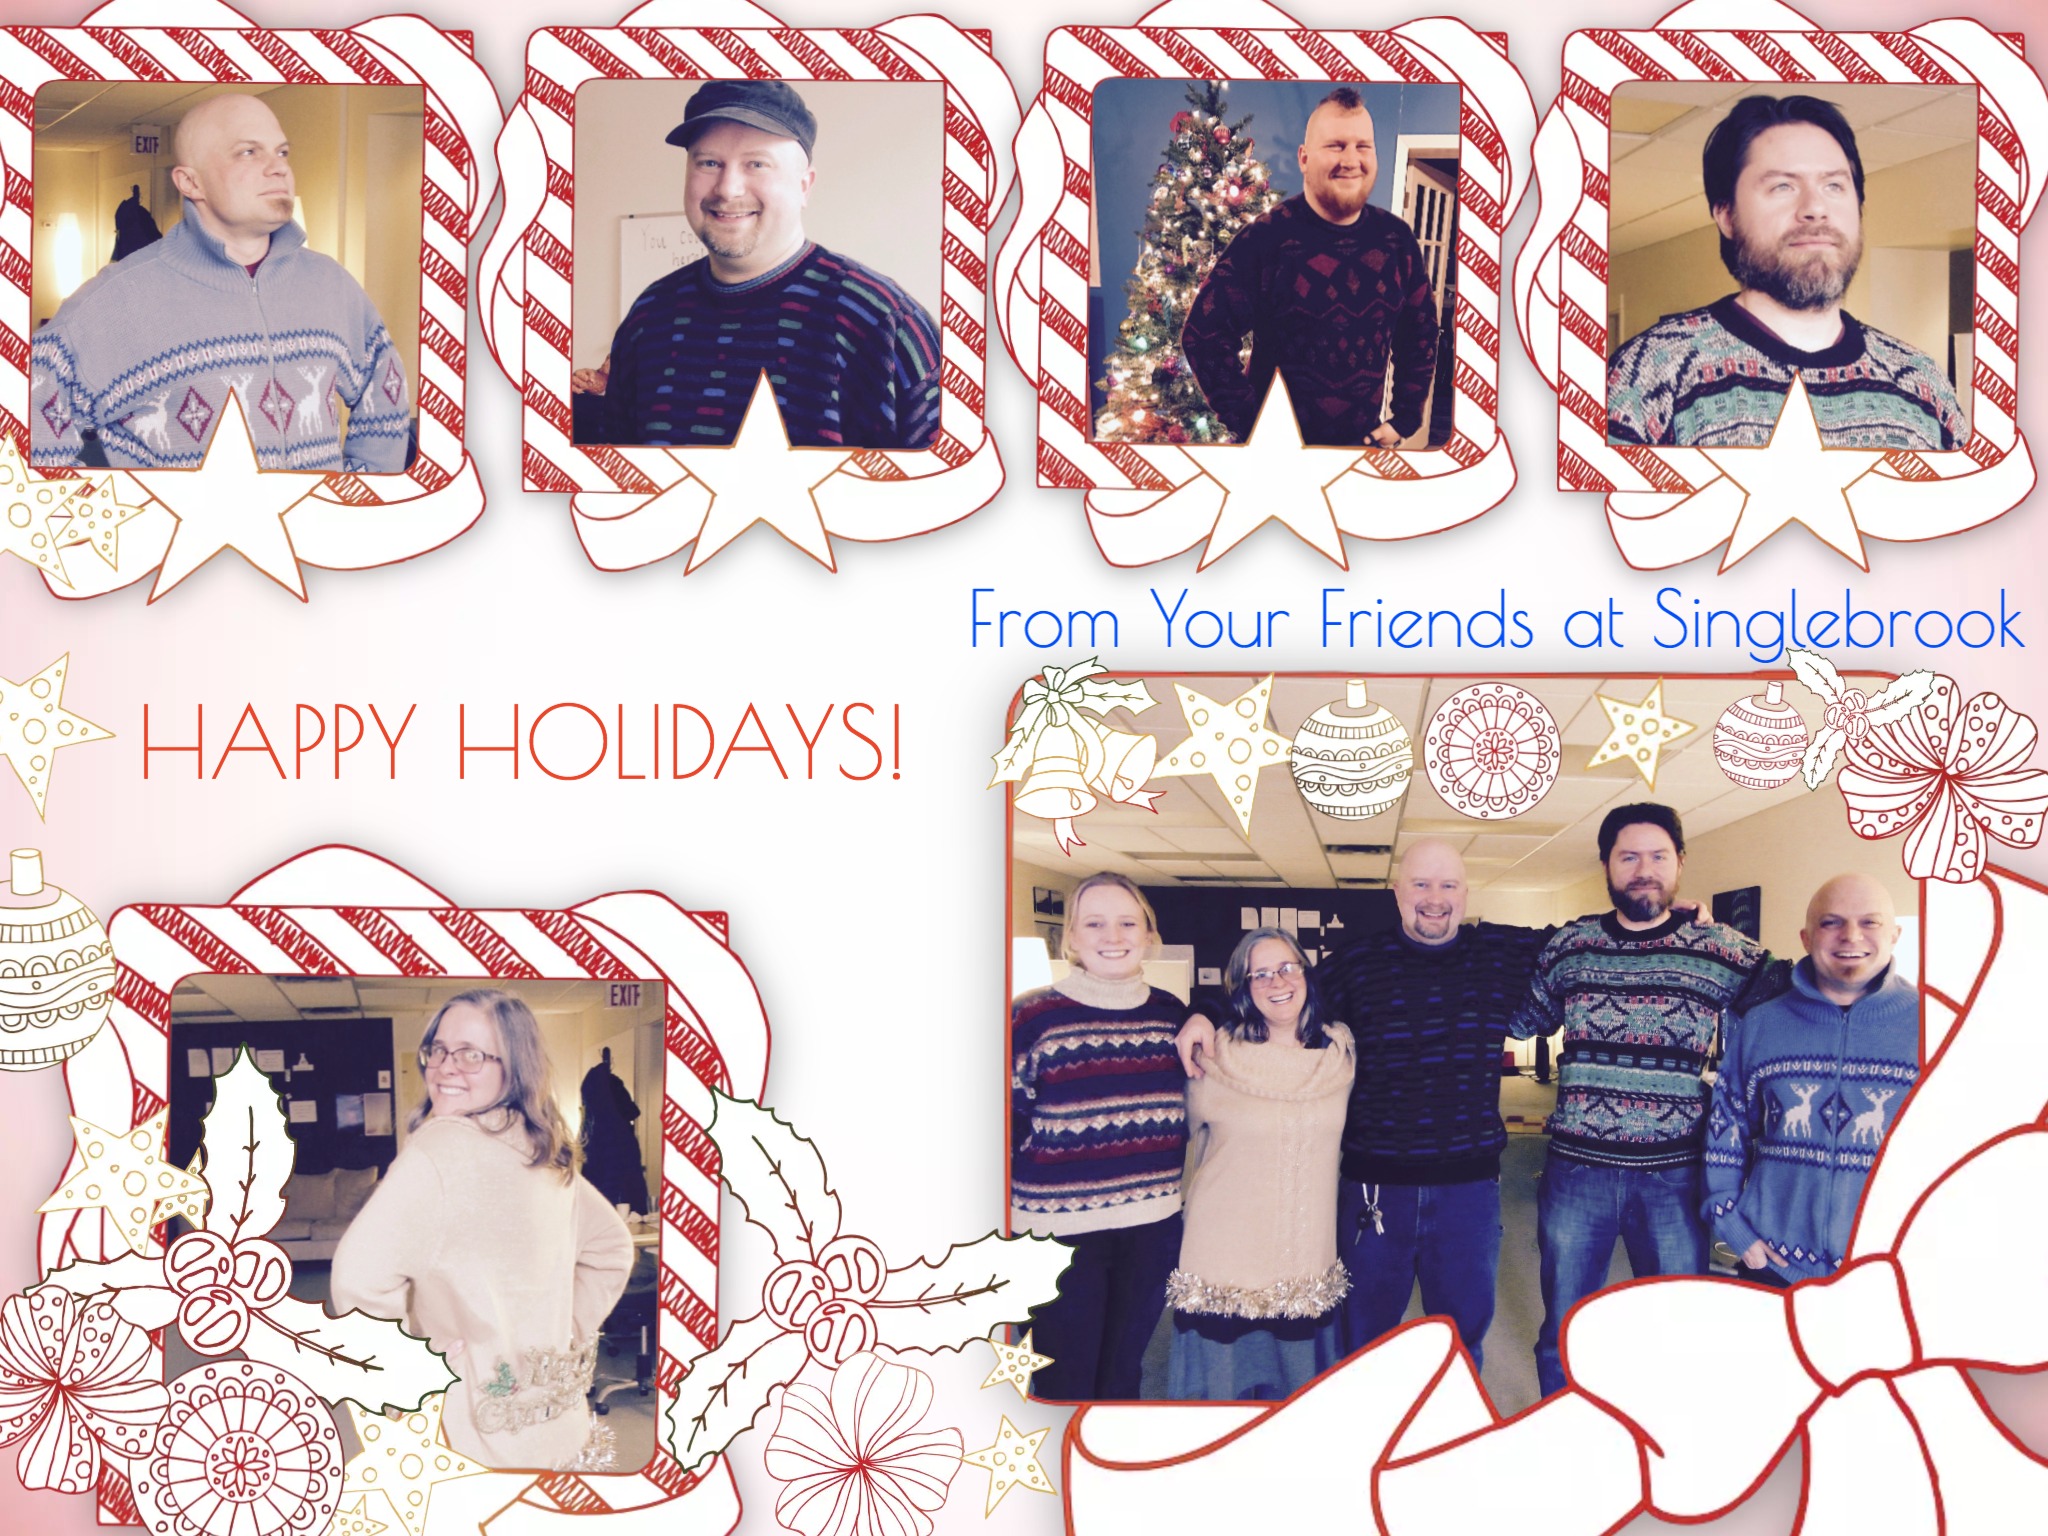 Holiday collage featuring our staff in awesome sweaters